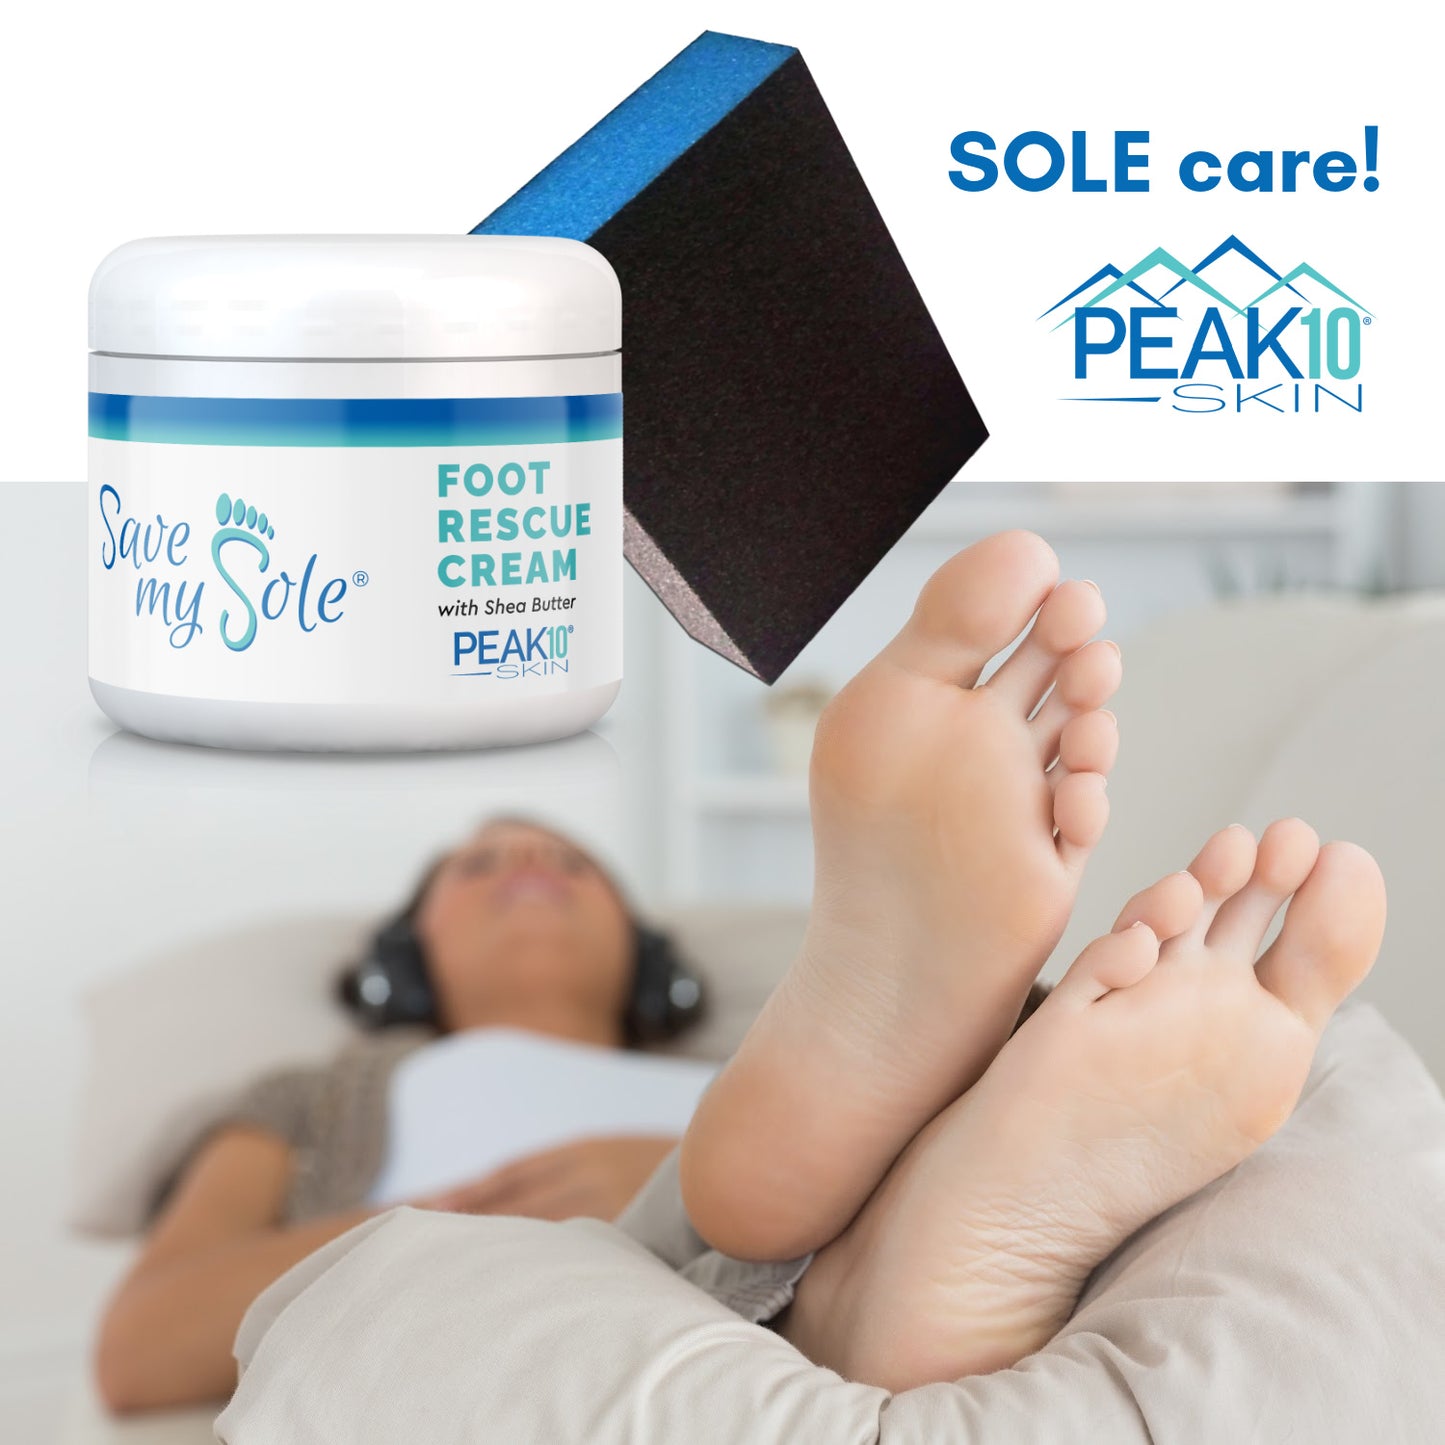 SAVE MY SOLE® foot rescue cream 4.2 oz w/Exfoliating Smoothing Block